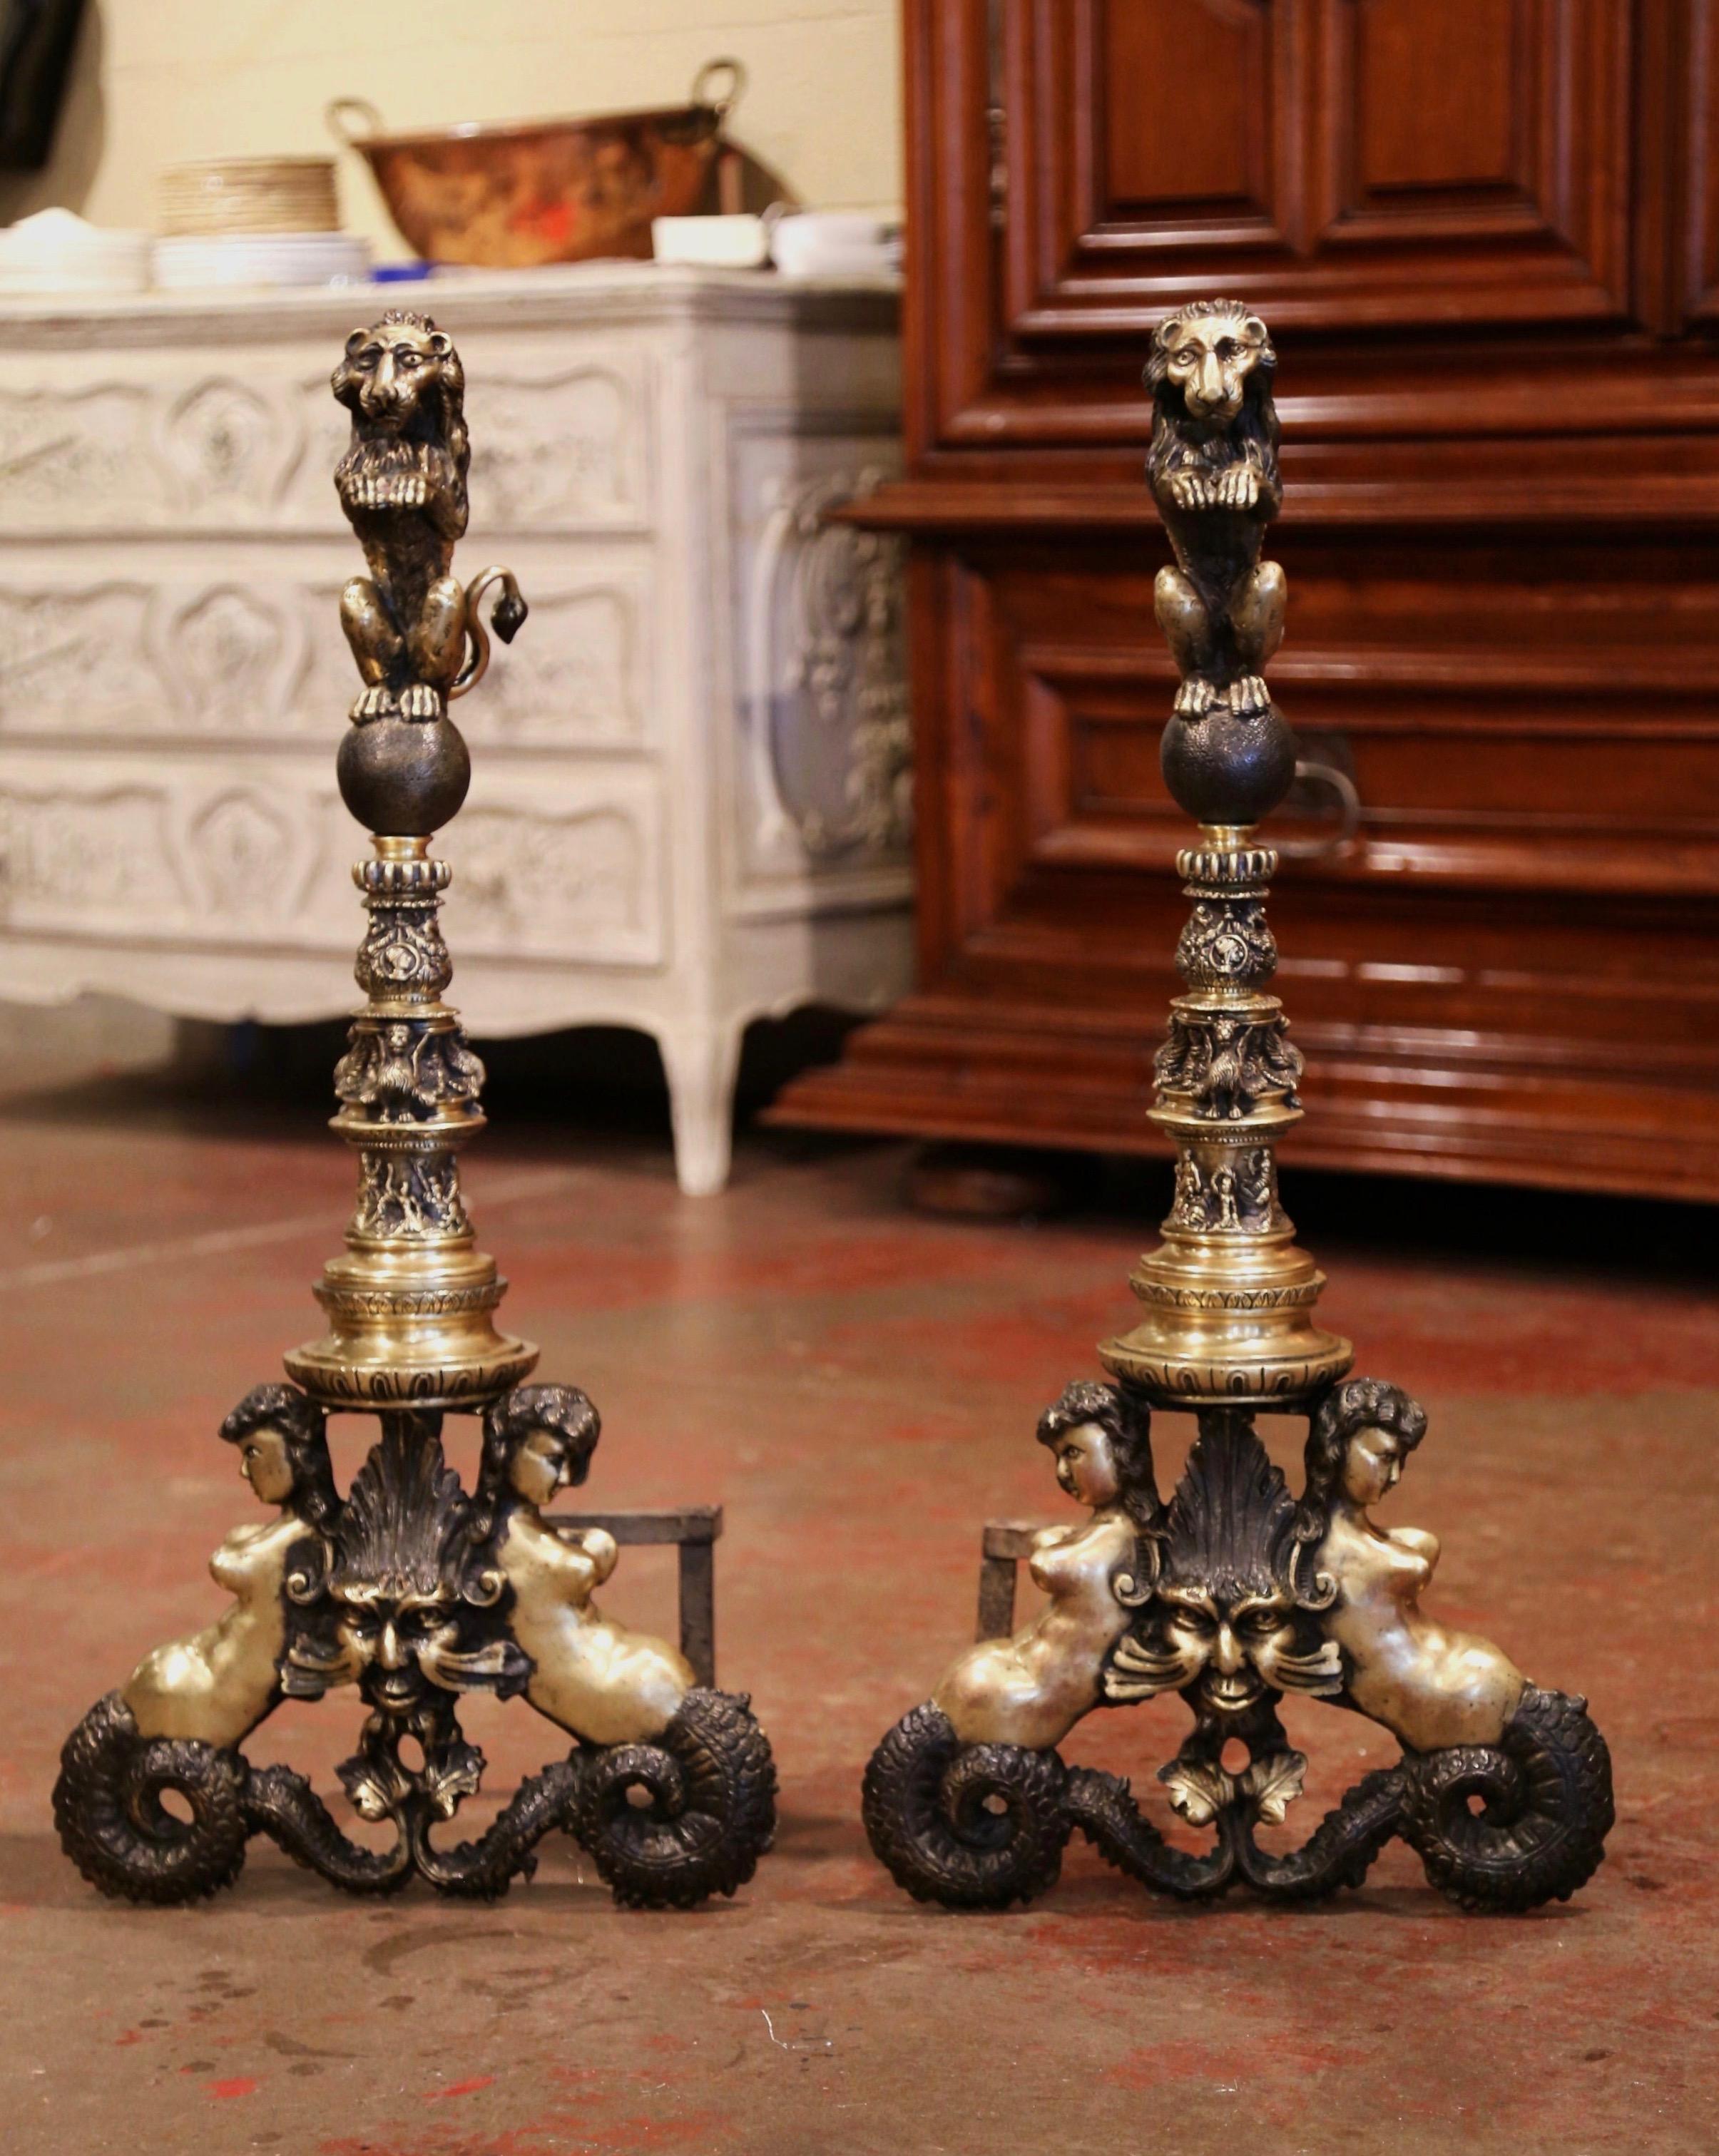 Decorate a fireplace hearth with this elegant pair of antique chenets; crafted in England circa 1830, each heavy bronze andiron is decorated at the base with mermaid and grotesques motifs. The tall stem with intricate rings is decorated at the top